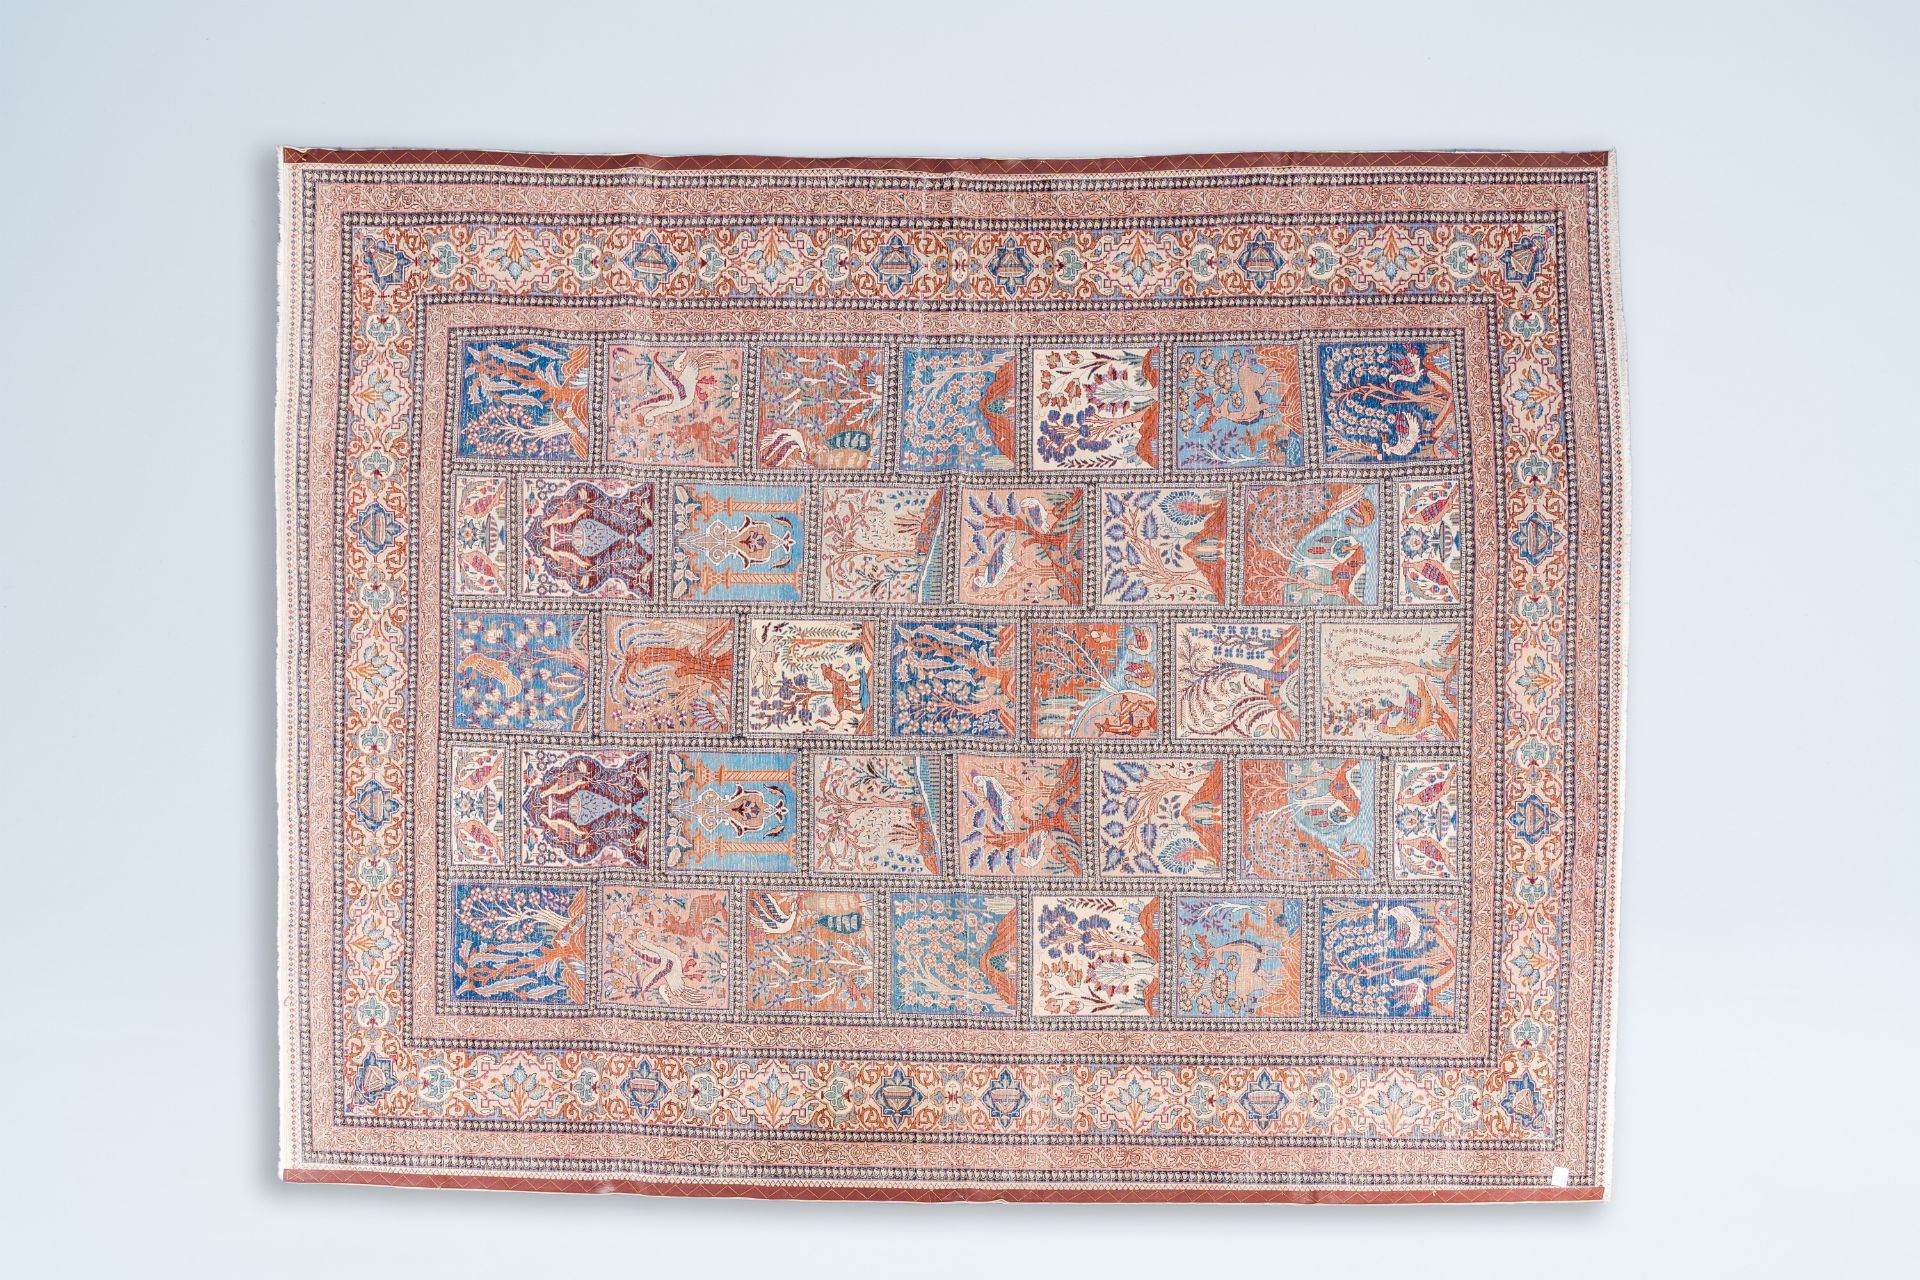 A Persian Bakhtiari rug with animals and floral design, wool on cotton, Iran, 20th C. - Image 2 of 20